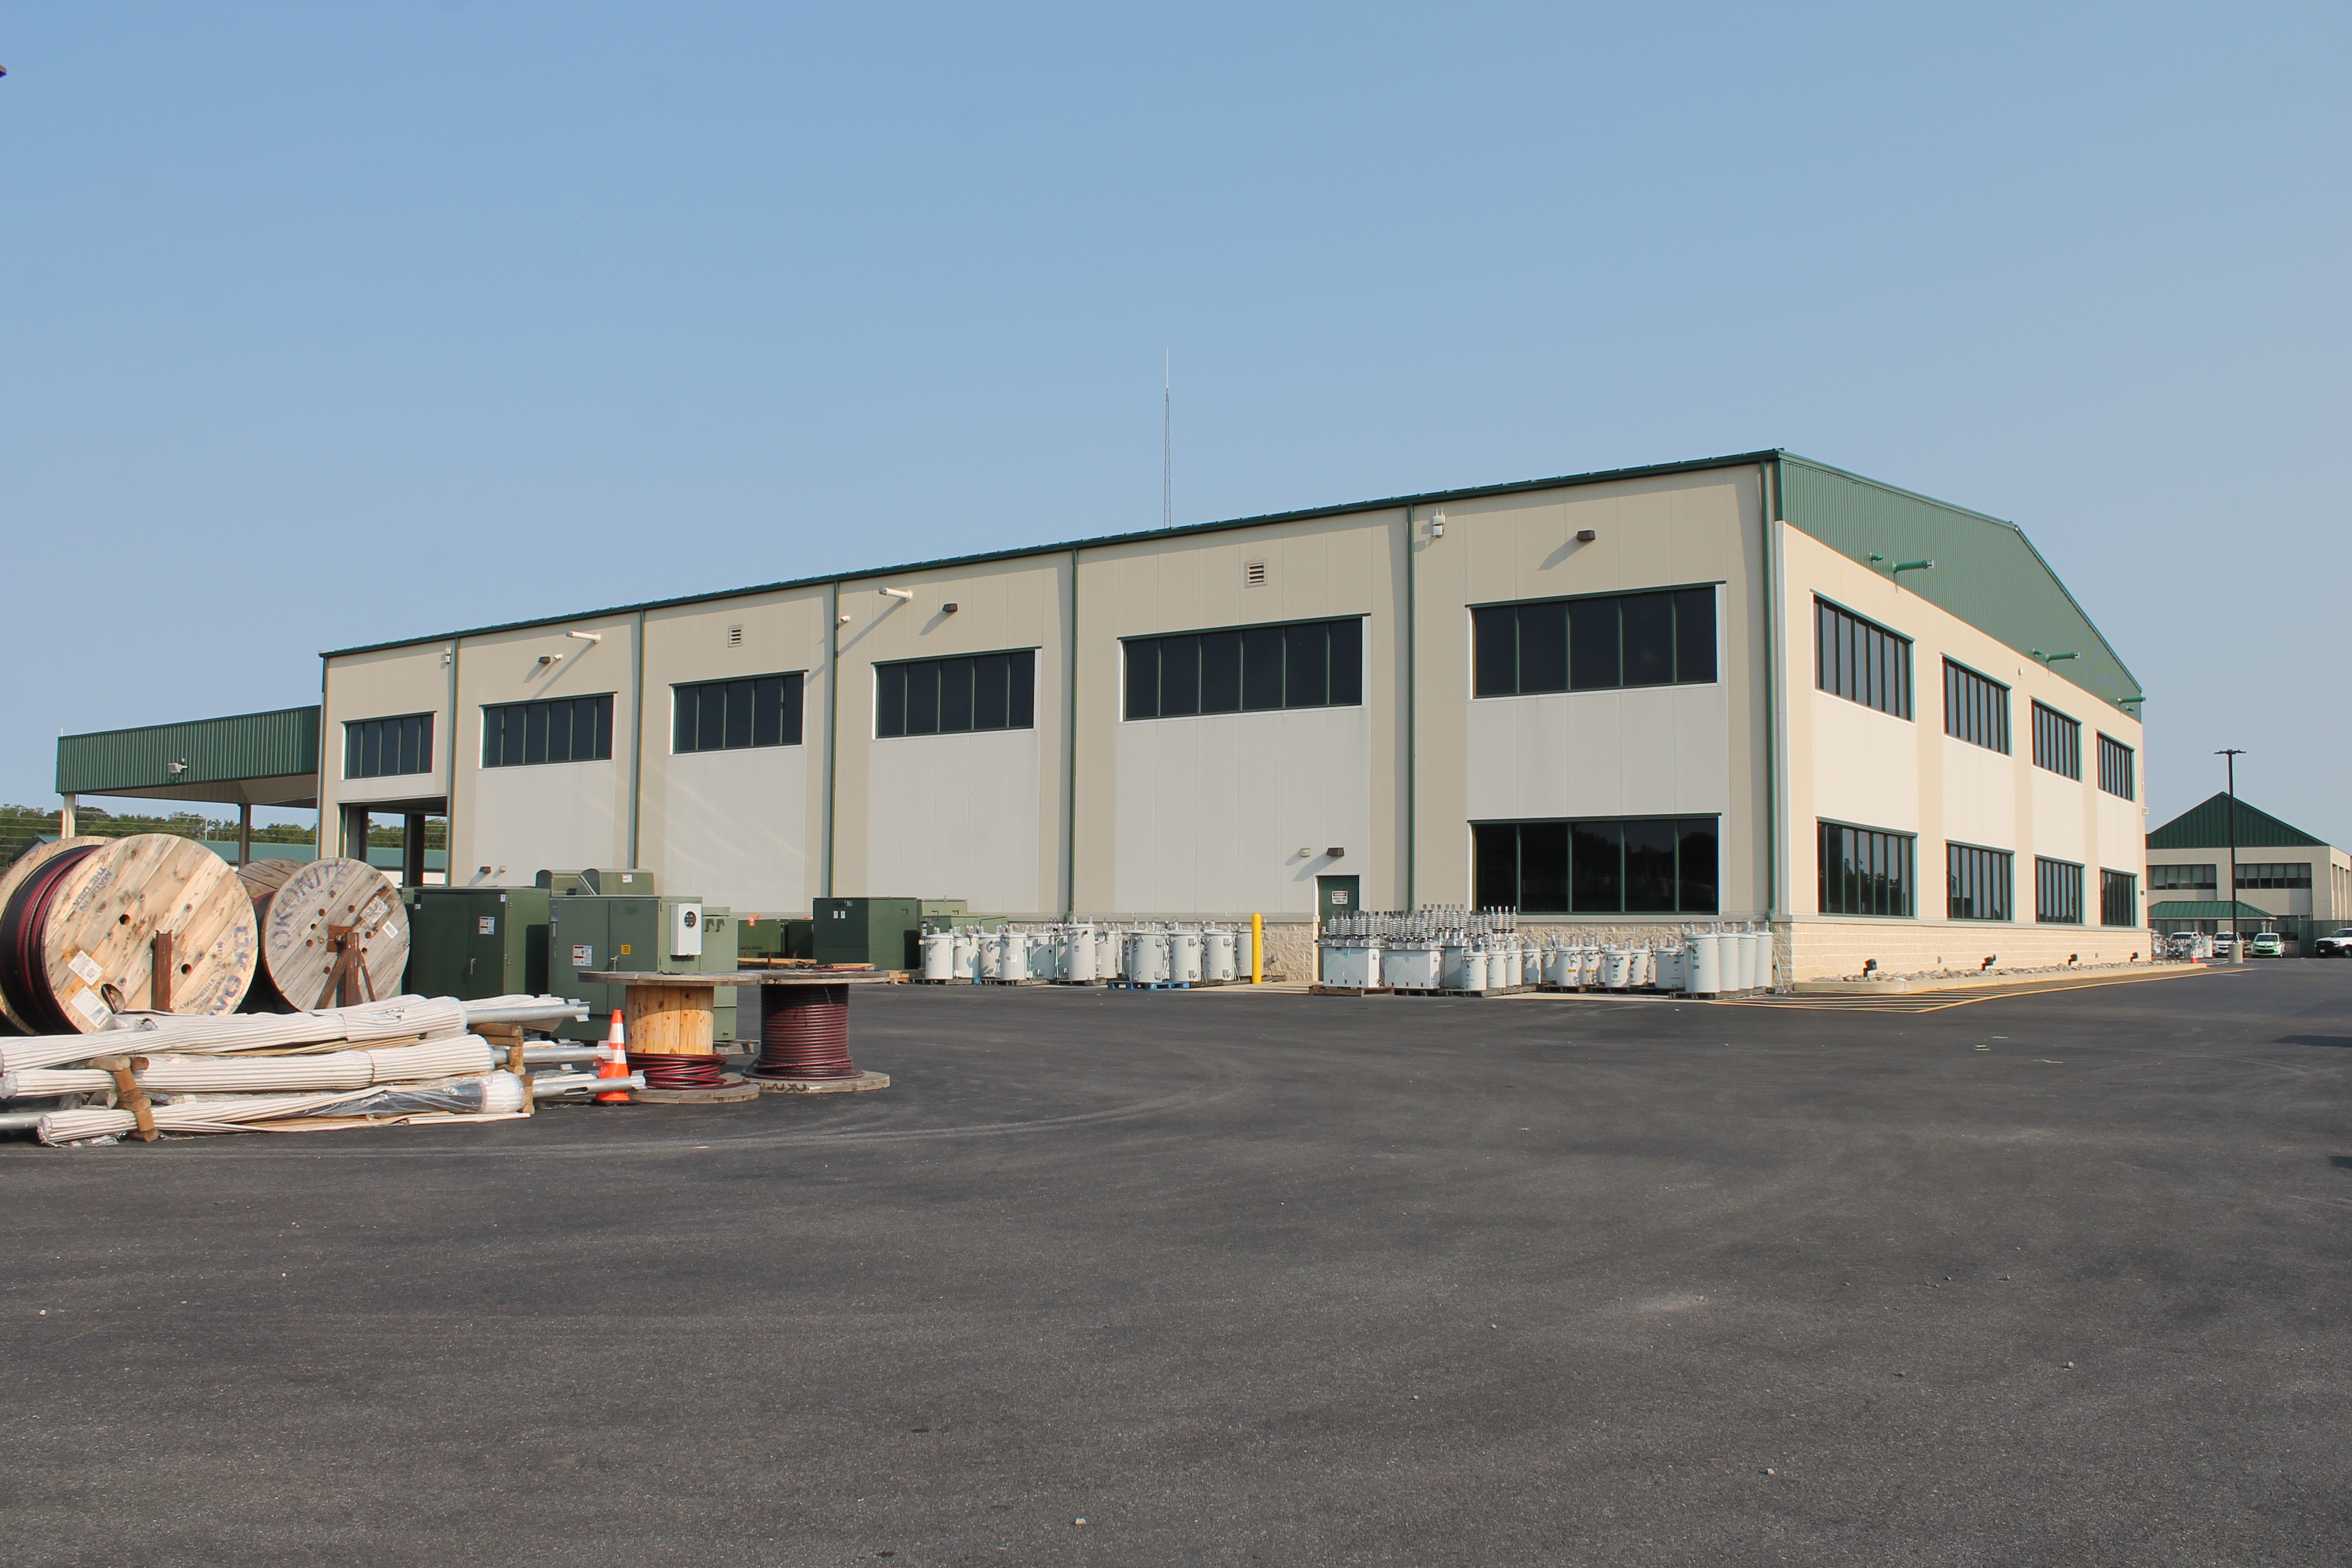 DEC's current warehouse was built in 2017, and stores all the Co-ops' materials used to maintain the electrical system.